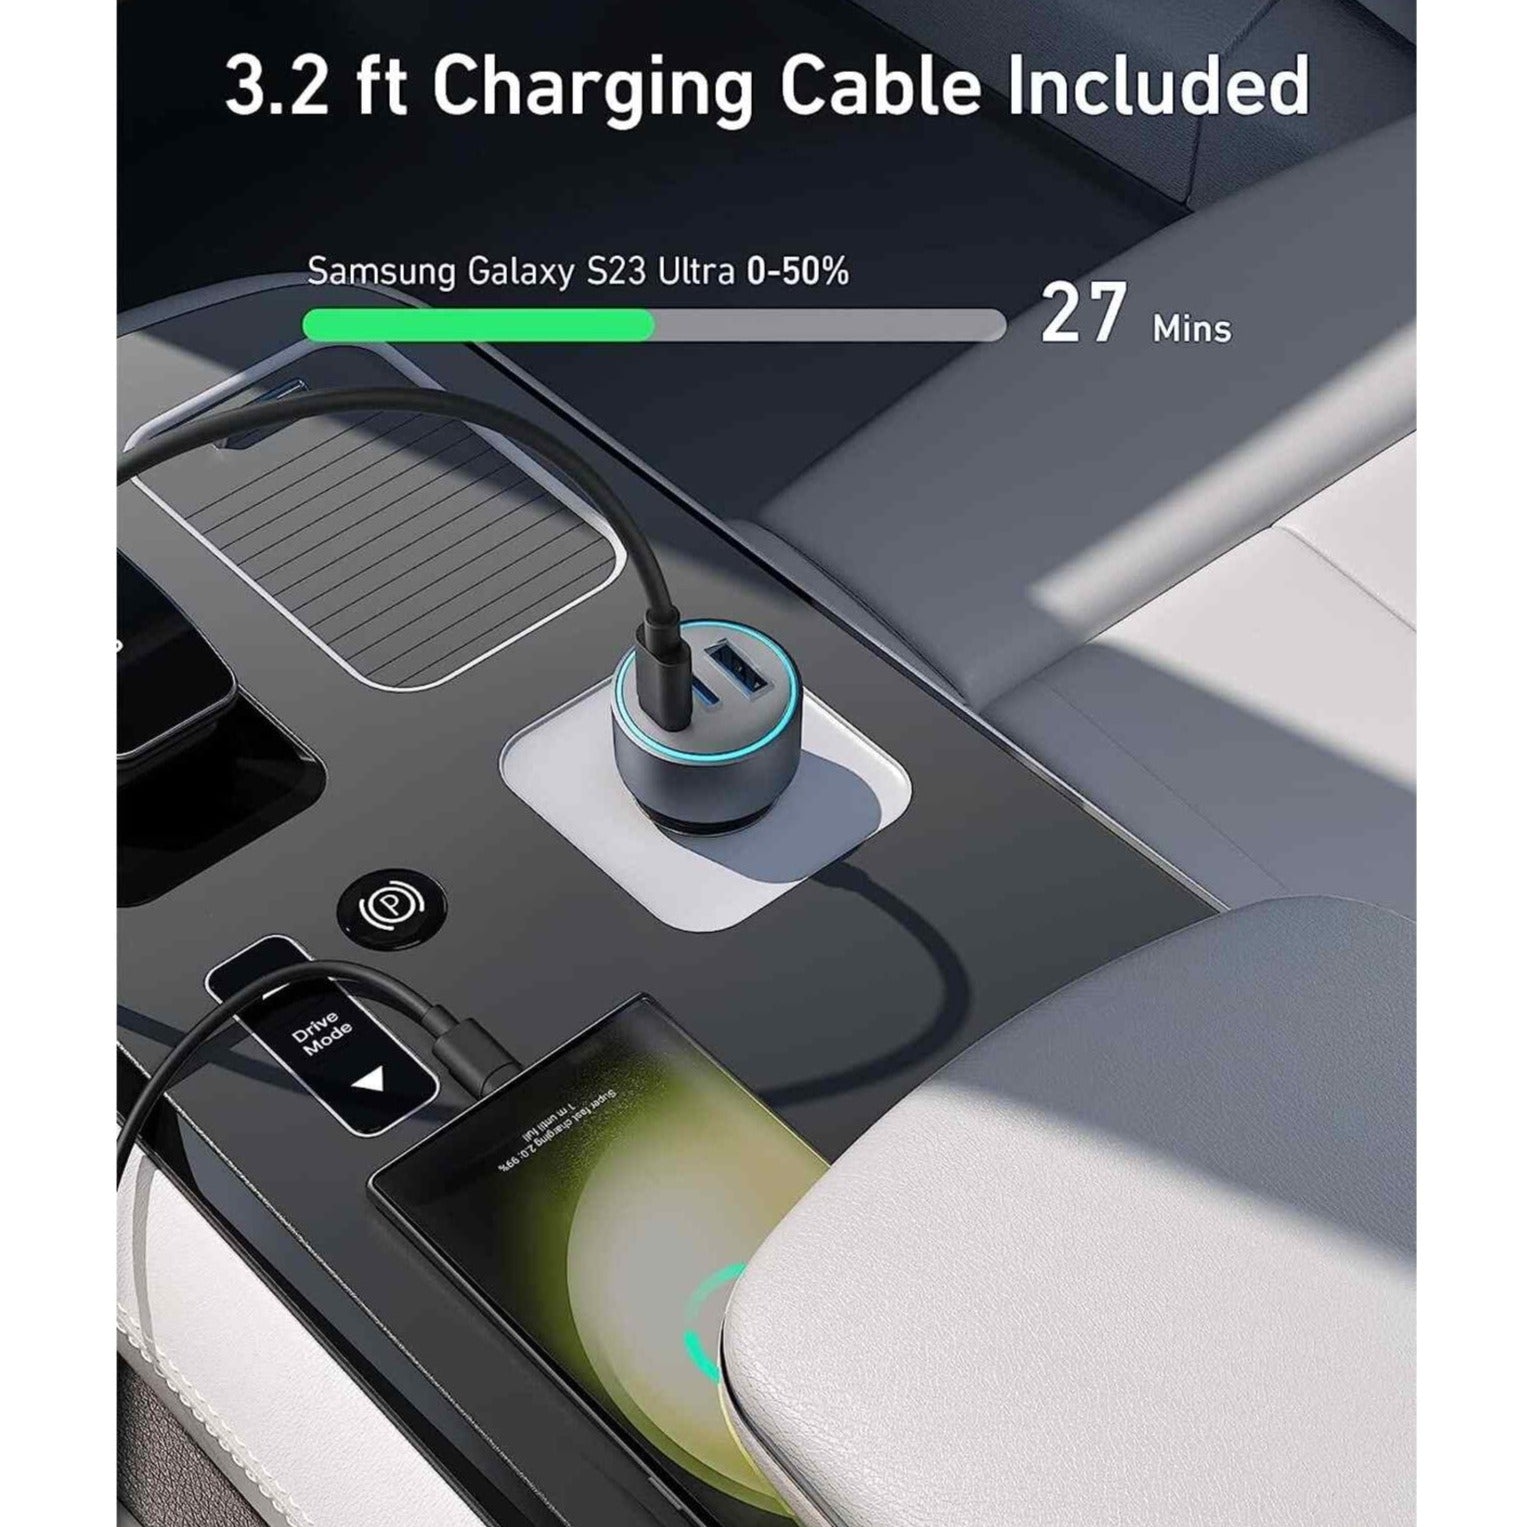 Anker 335 Car Charger 67W with a 3.2 ft charging cable included